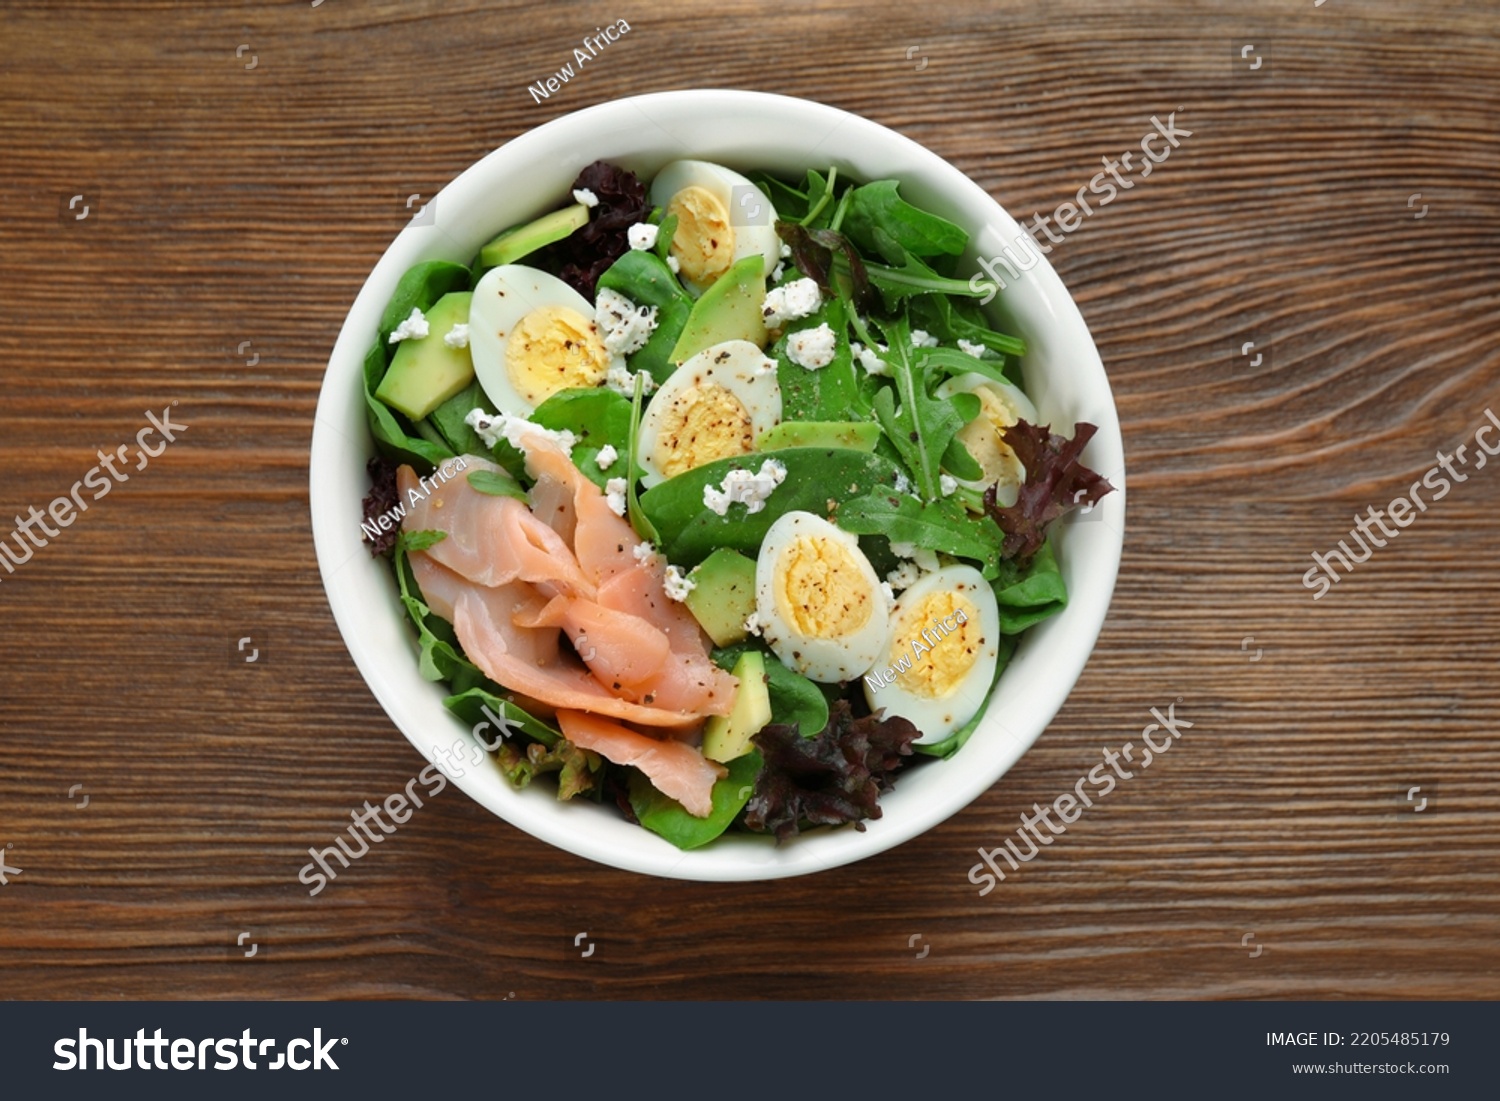 Delicious salad with boiled eggs, salmon and cheese in bowl on wooden table, top view #2205485179